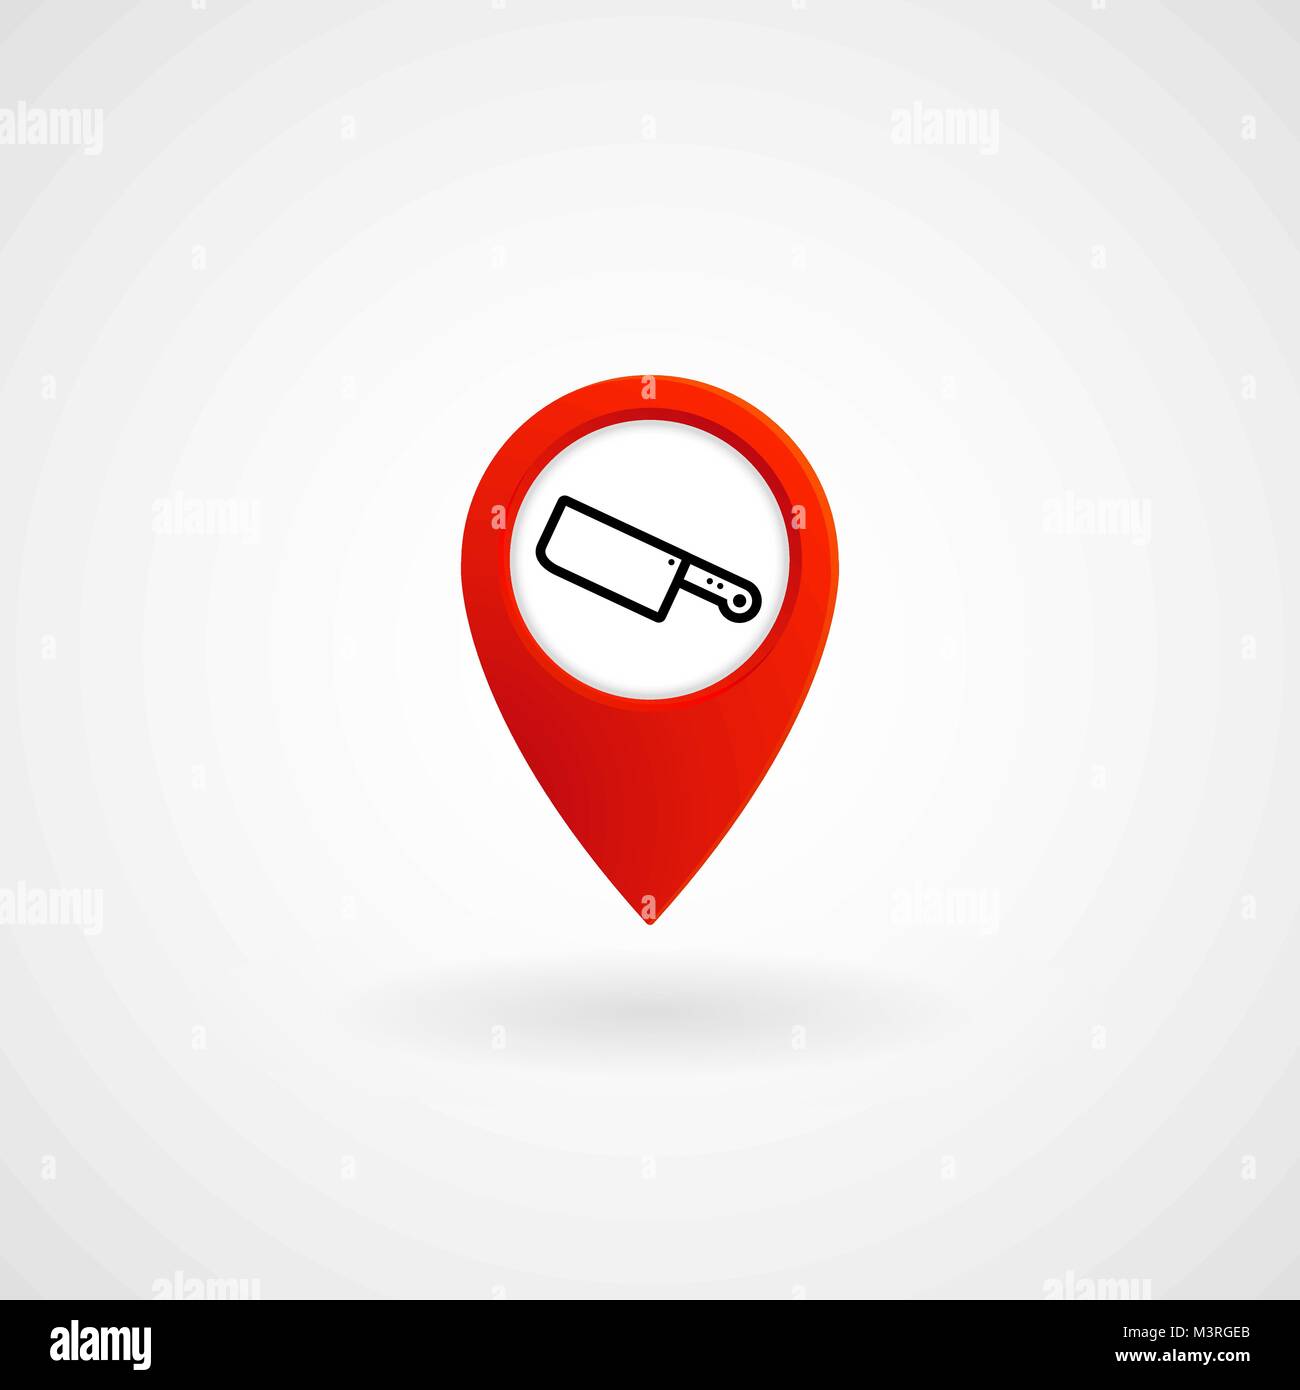 Red Location Icon for Butcher, Vector, Illustration, Eps File Stock Vector